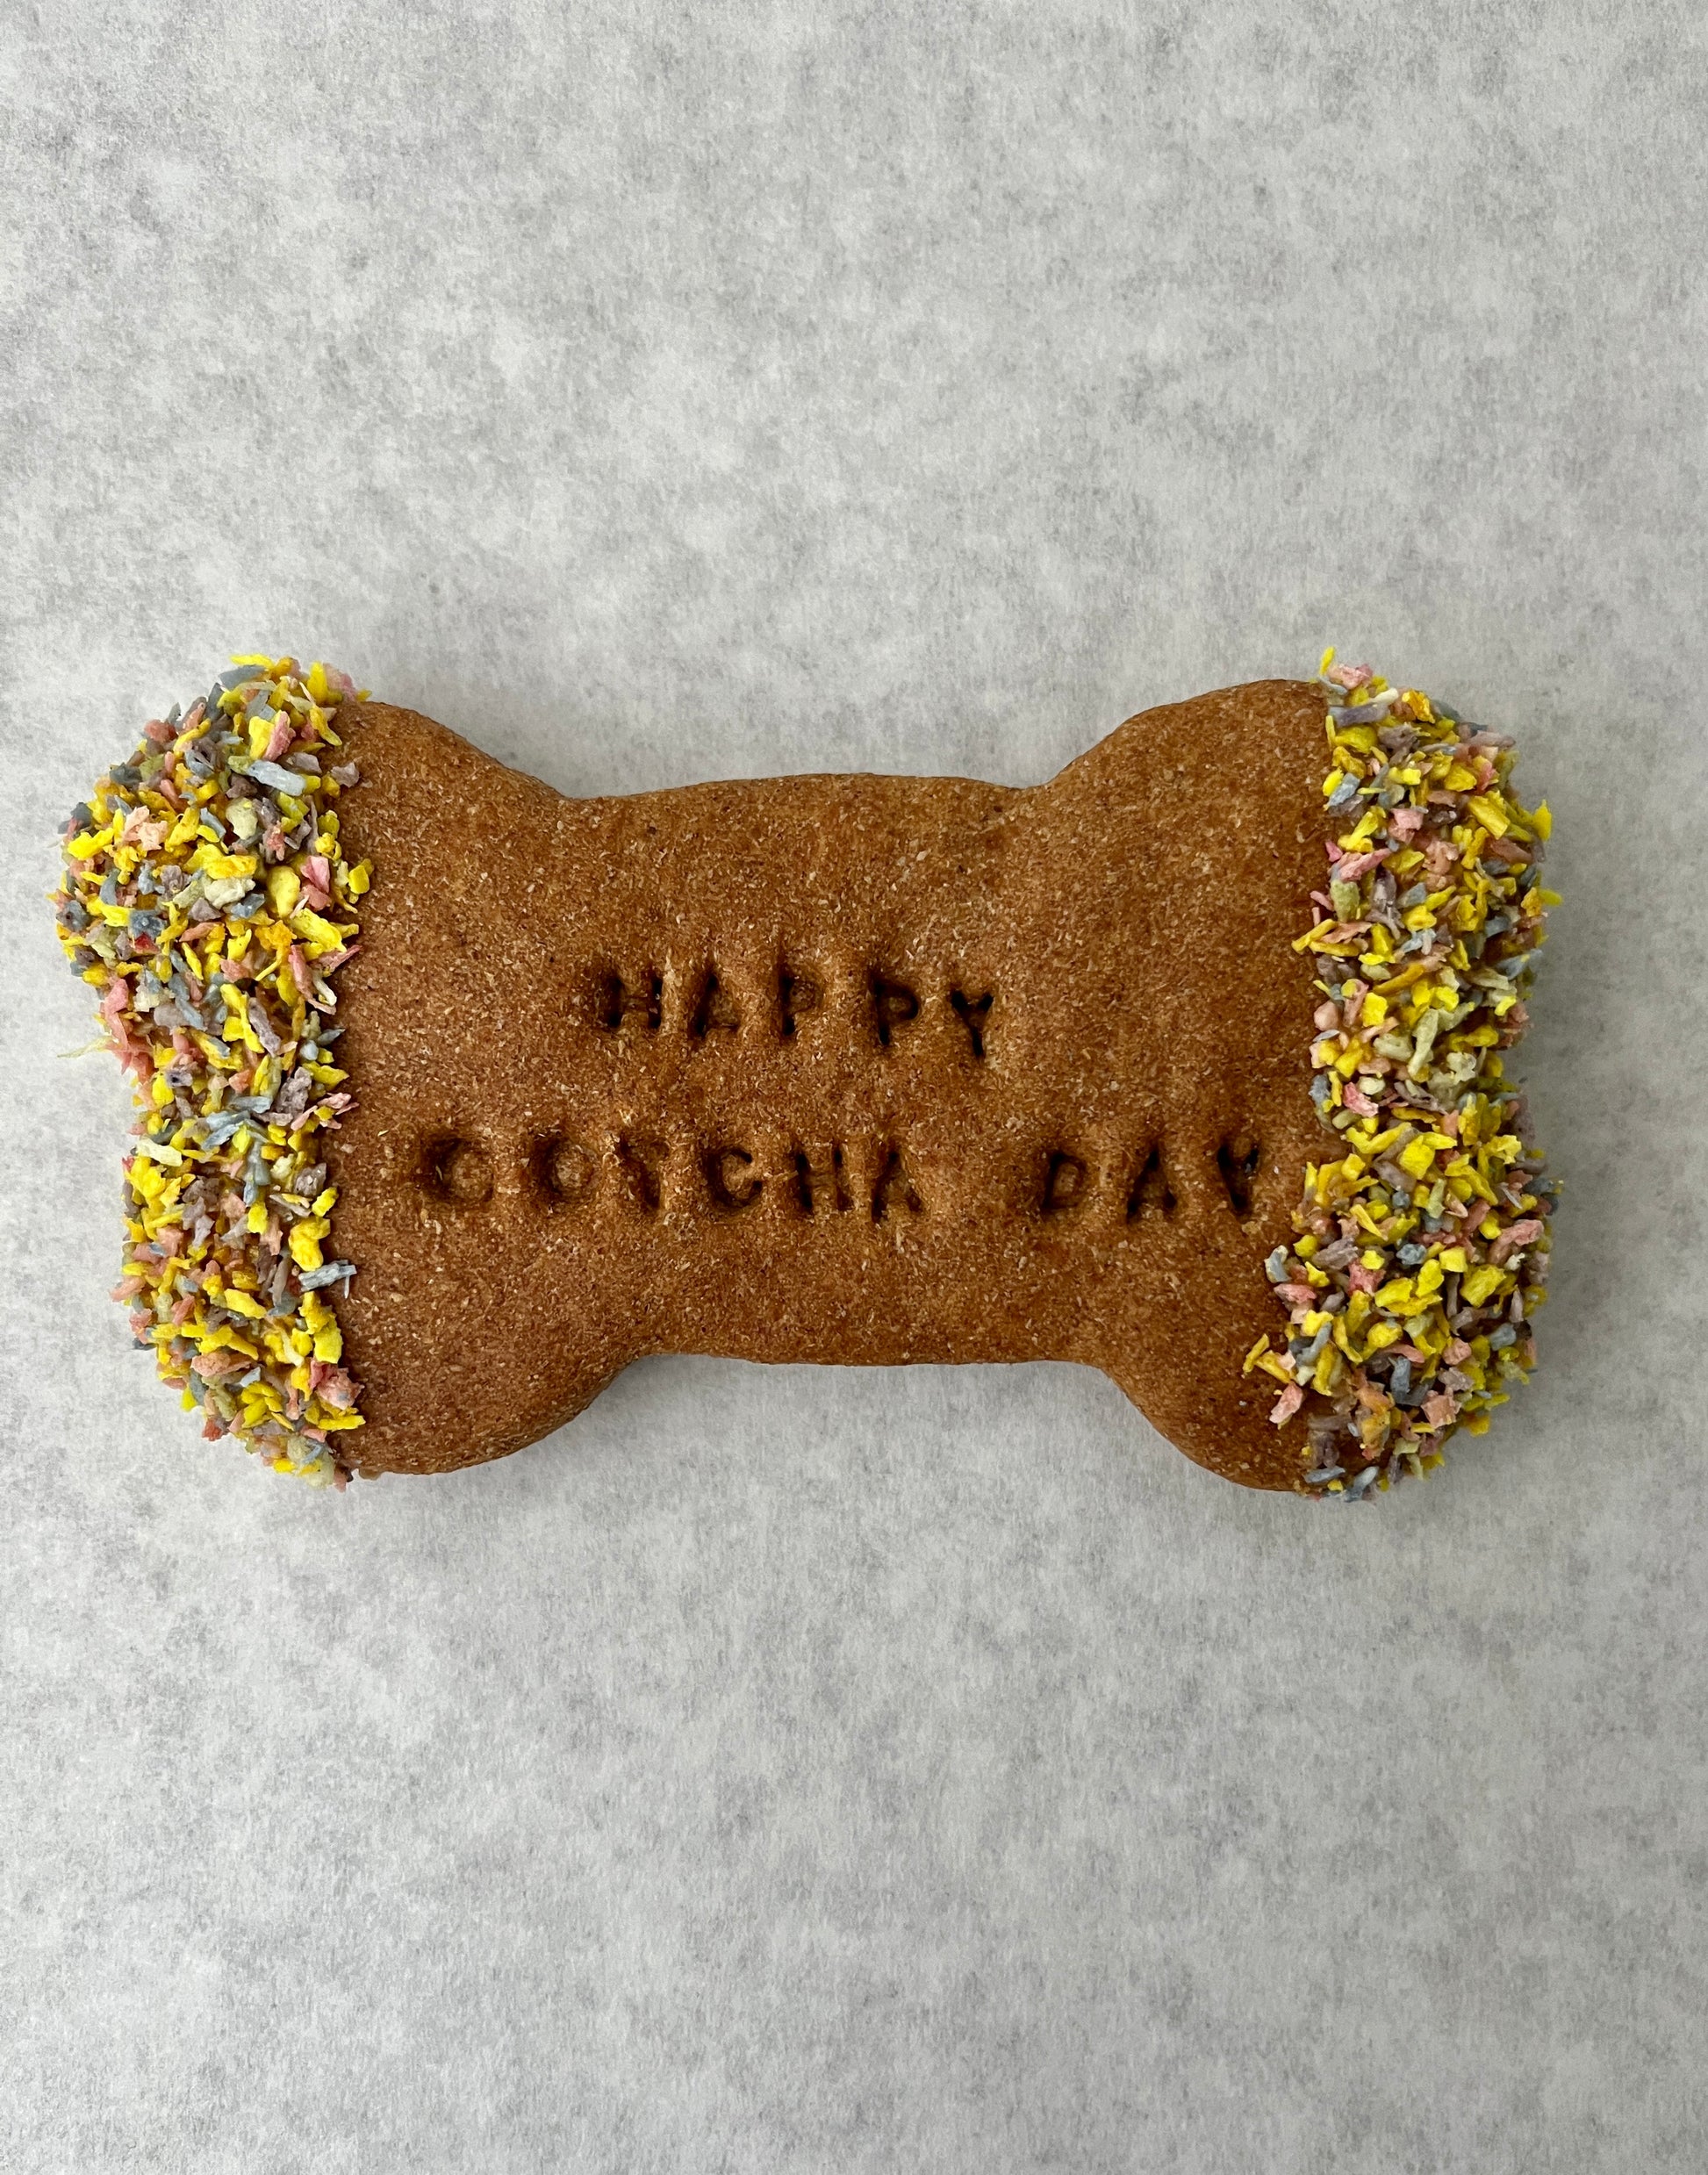 Celebration Dog Biscuits with Applesauce & Peanut Butter- Happy Gotcha Day